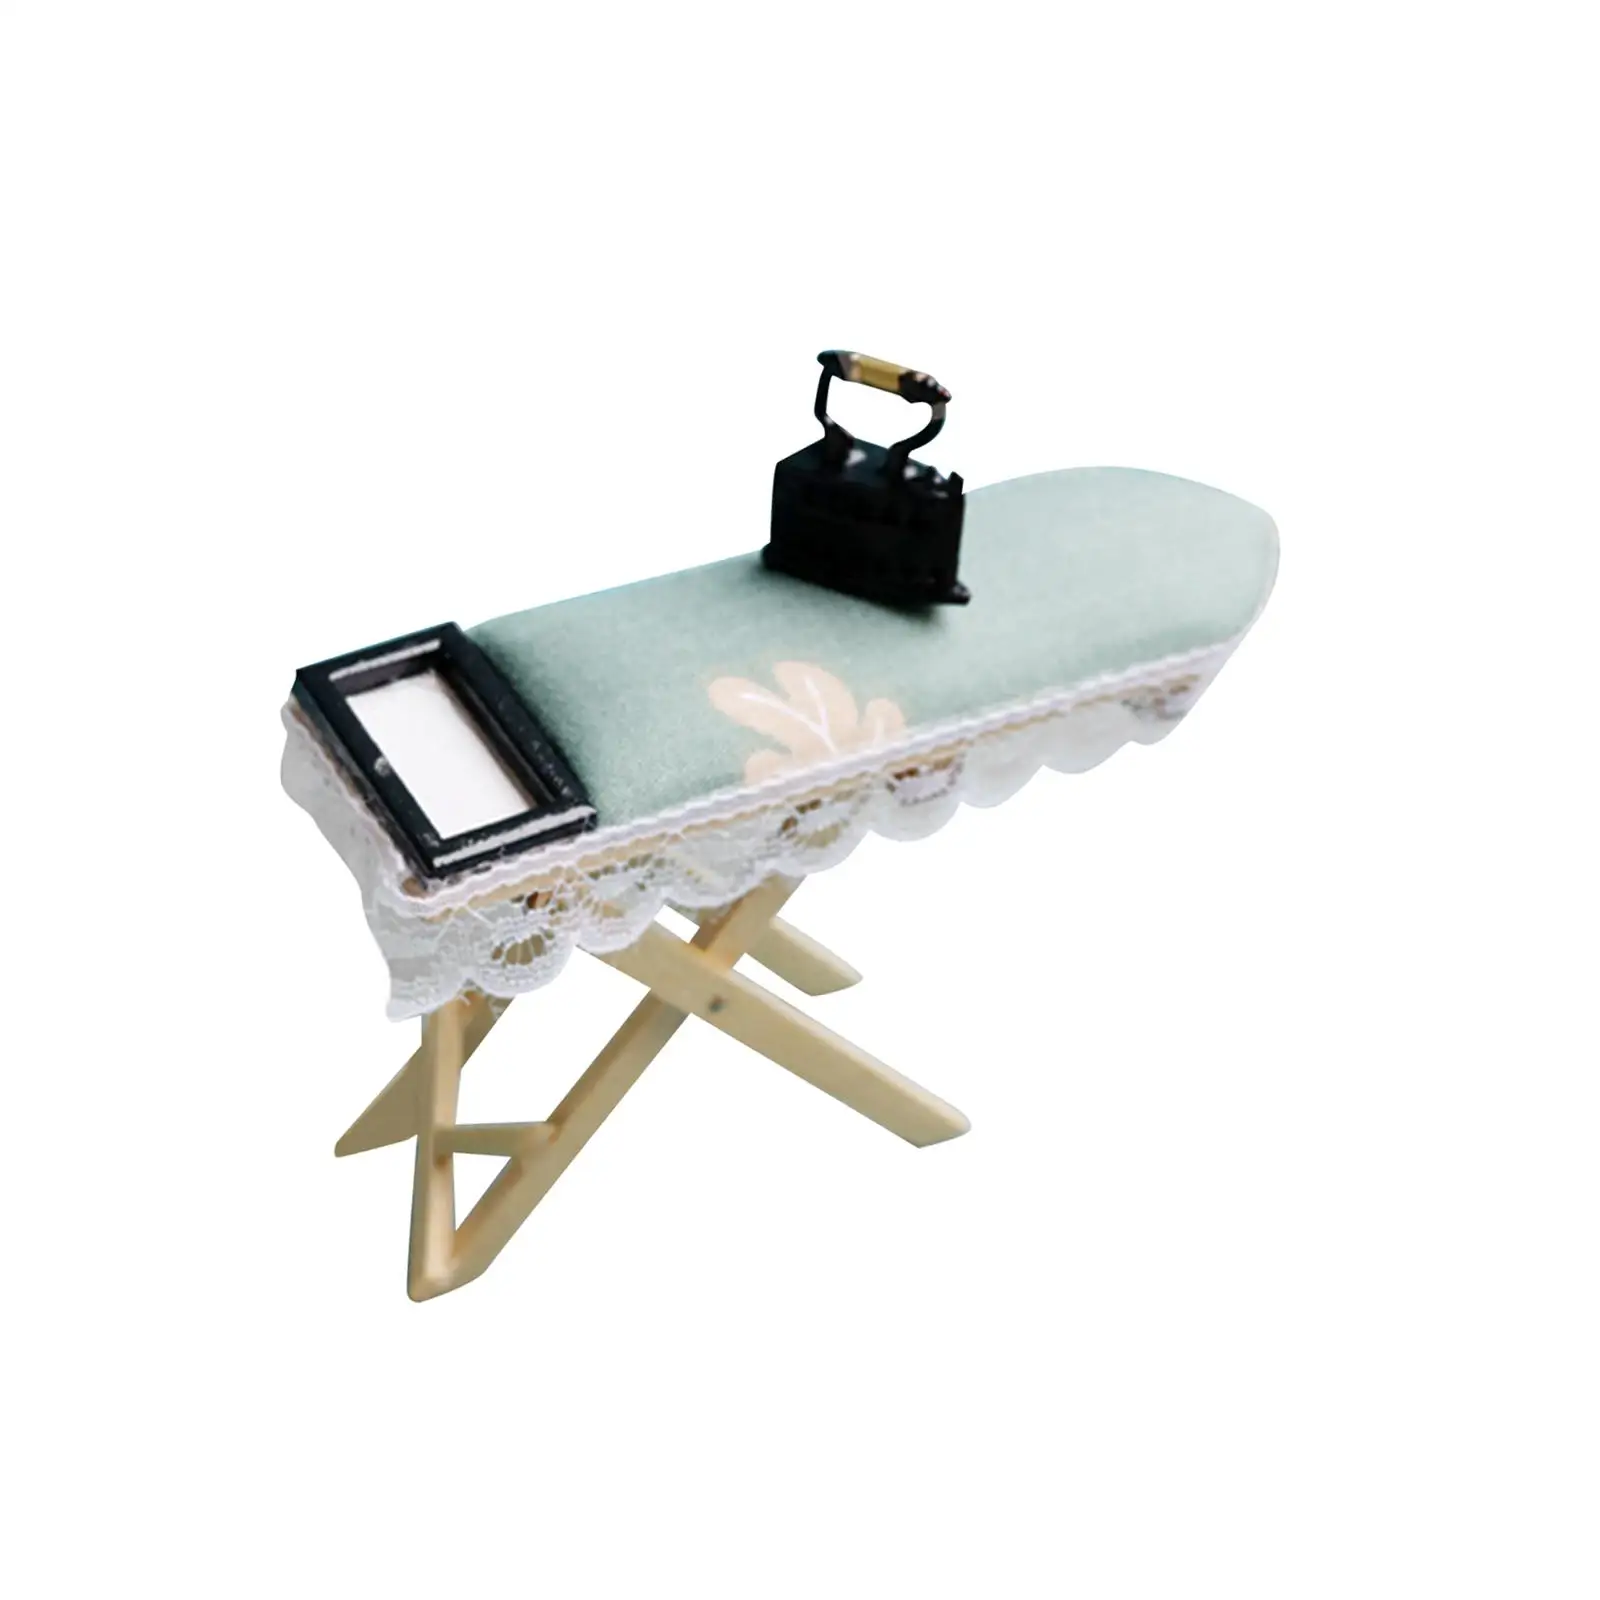 Dollhouse Ironing Board Miniature Decor Accessories with Iron for Cloakroom